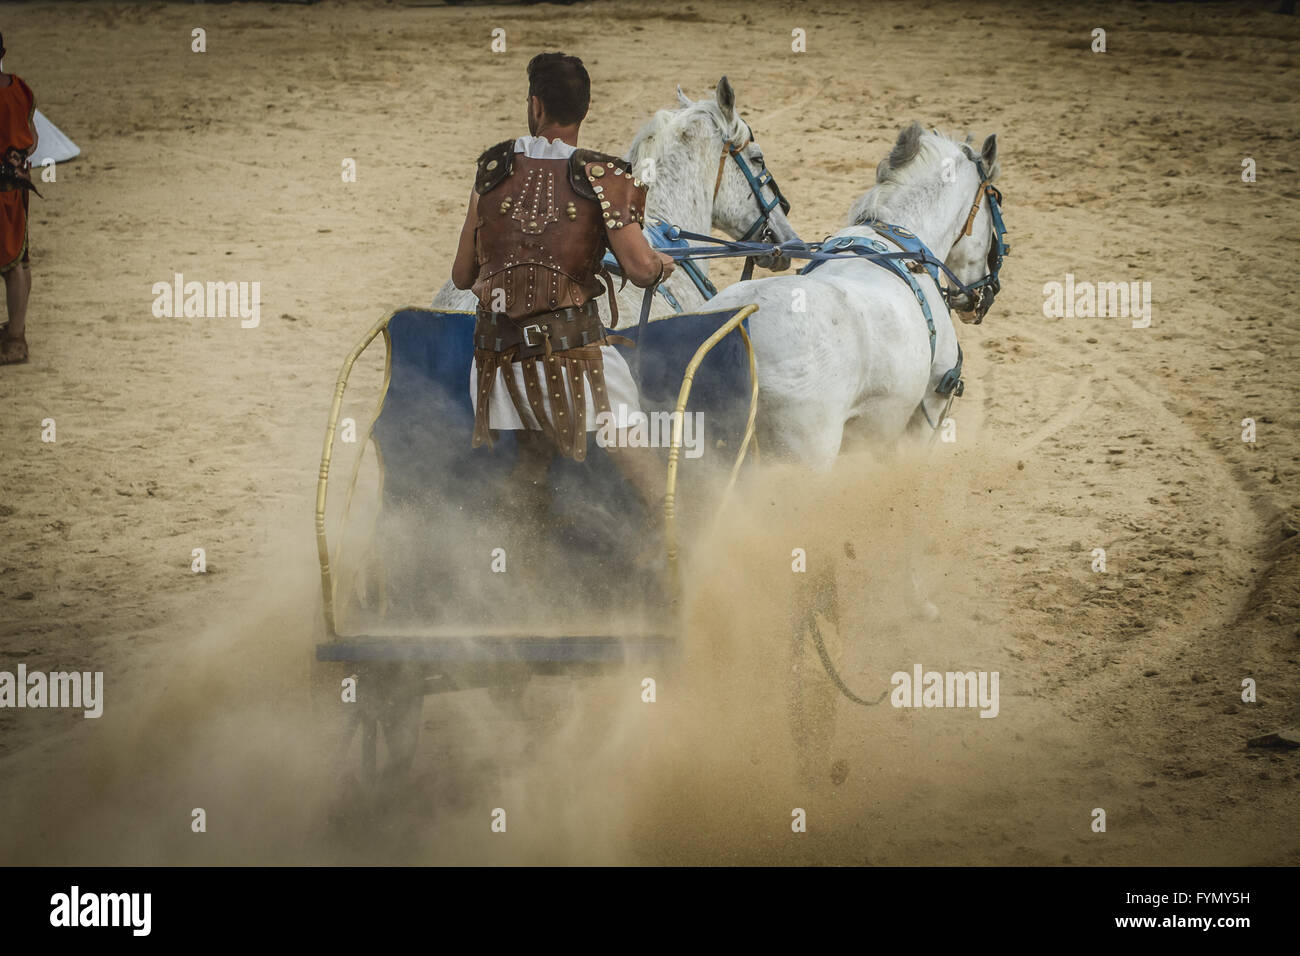 Empire, chariot race in a Roman circus, gladiators and slaves fighting Stock Photo